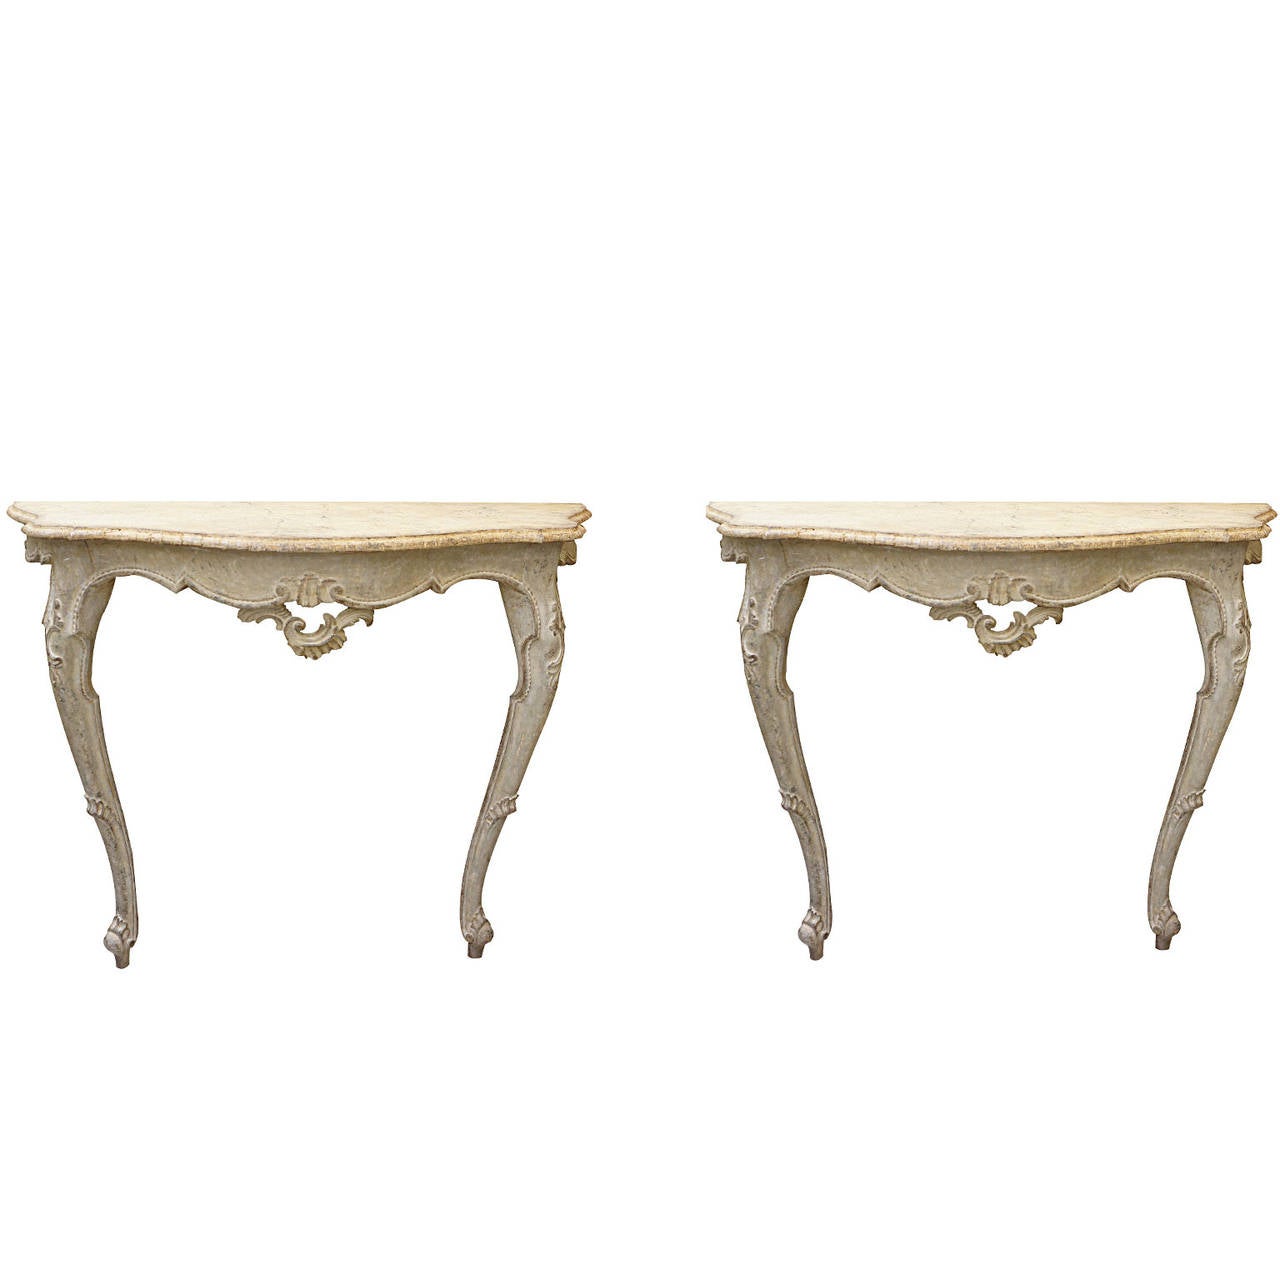 Pair of 18th Century Gustavian Painted Demilune Console Tables For Sale ...